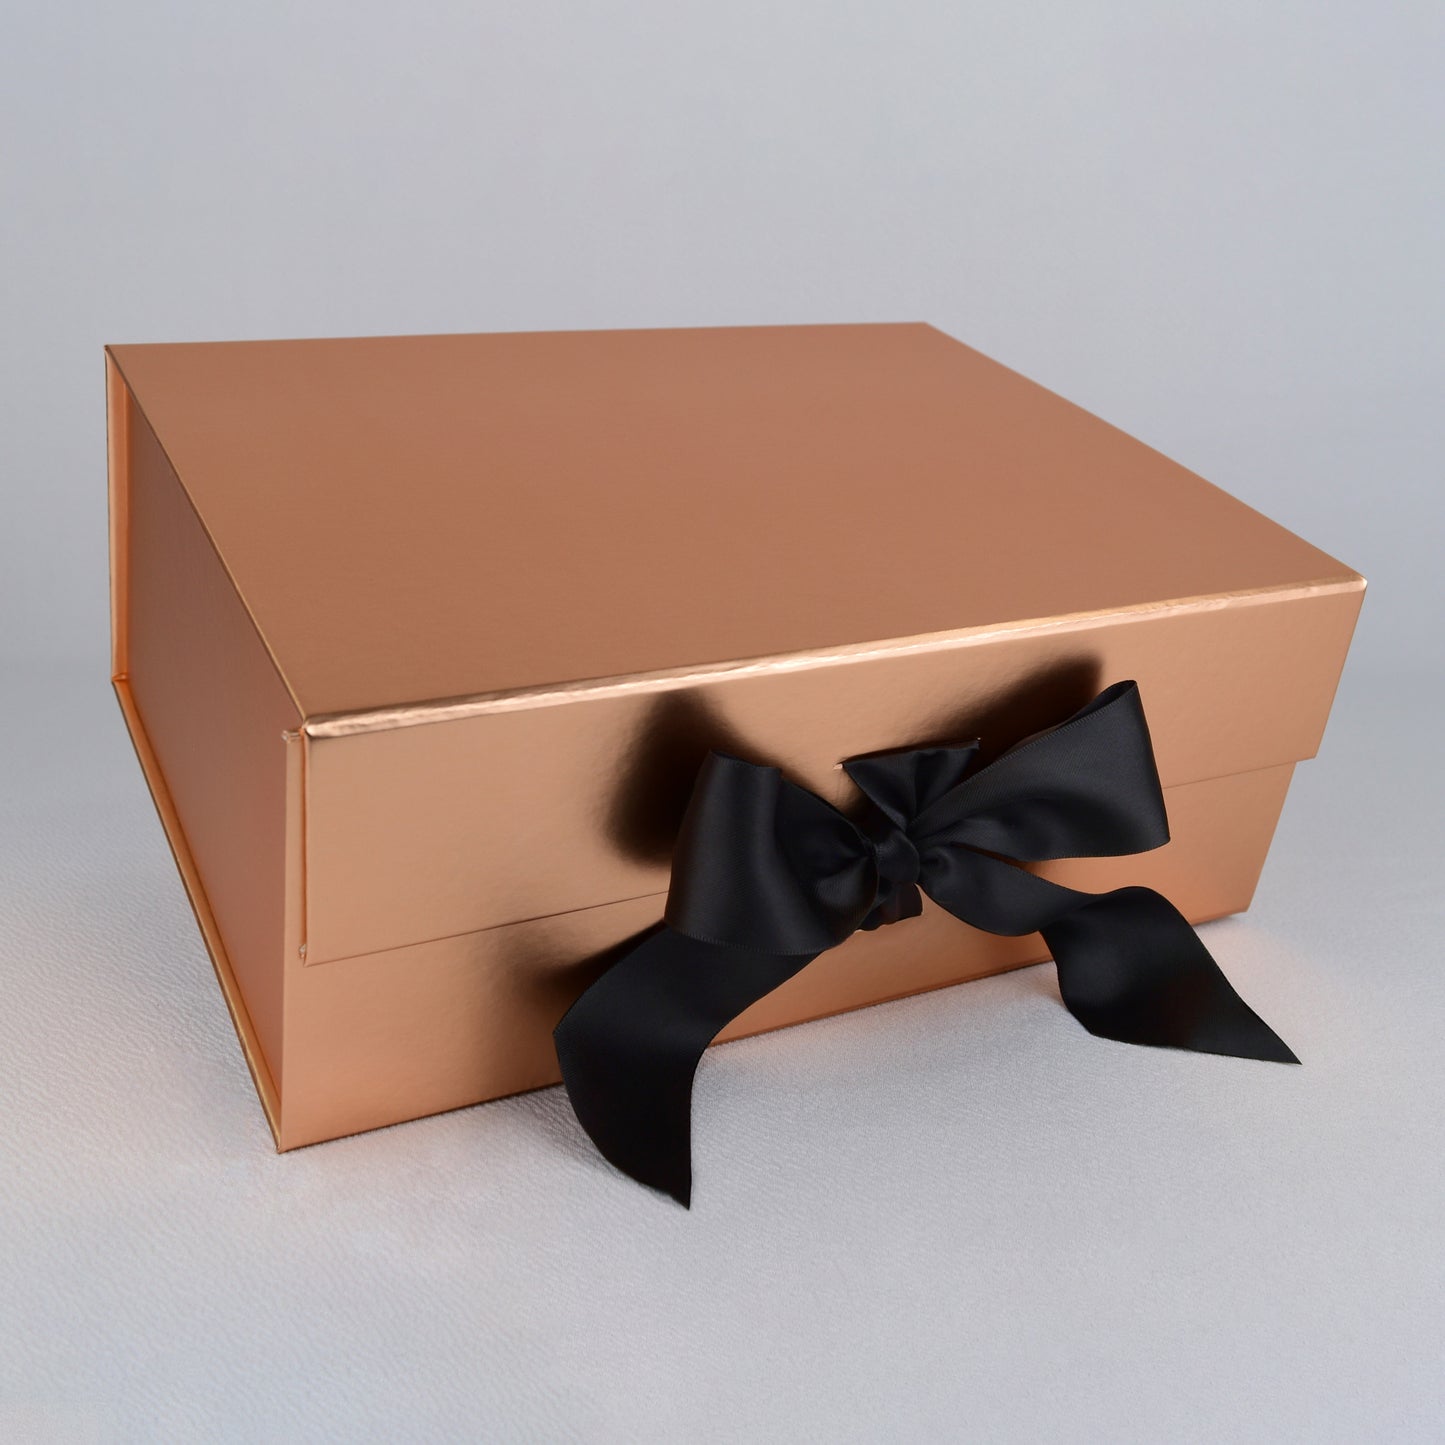 LARGE Premium Gift Box with Satin Ribbon and Magnetic Closure (11" x 8.75" x 4.37")